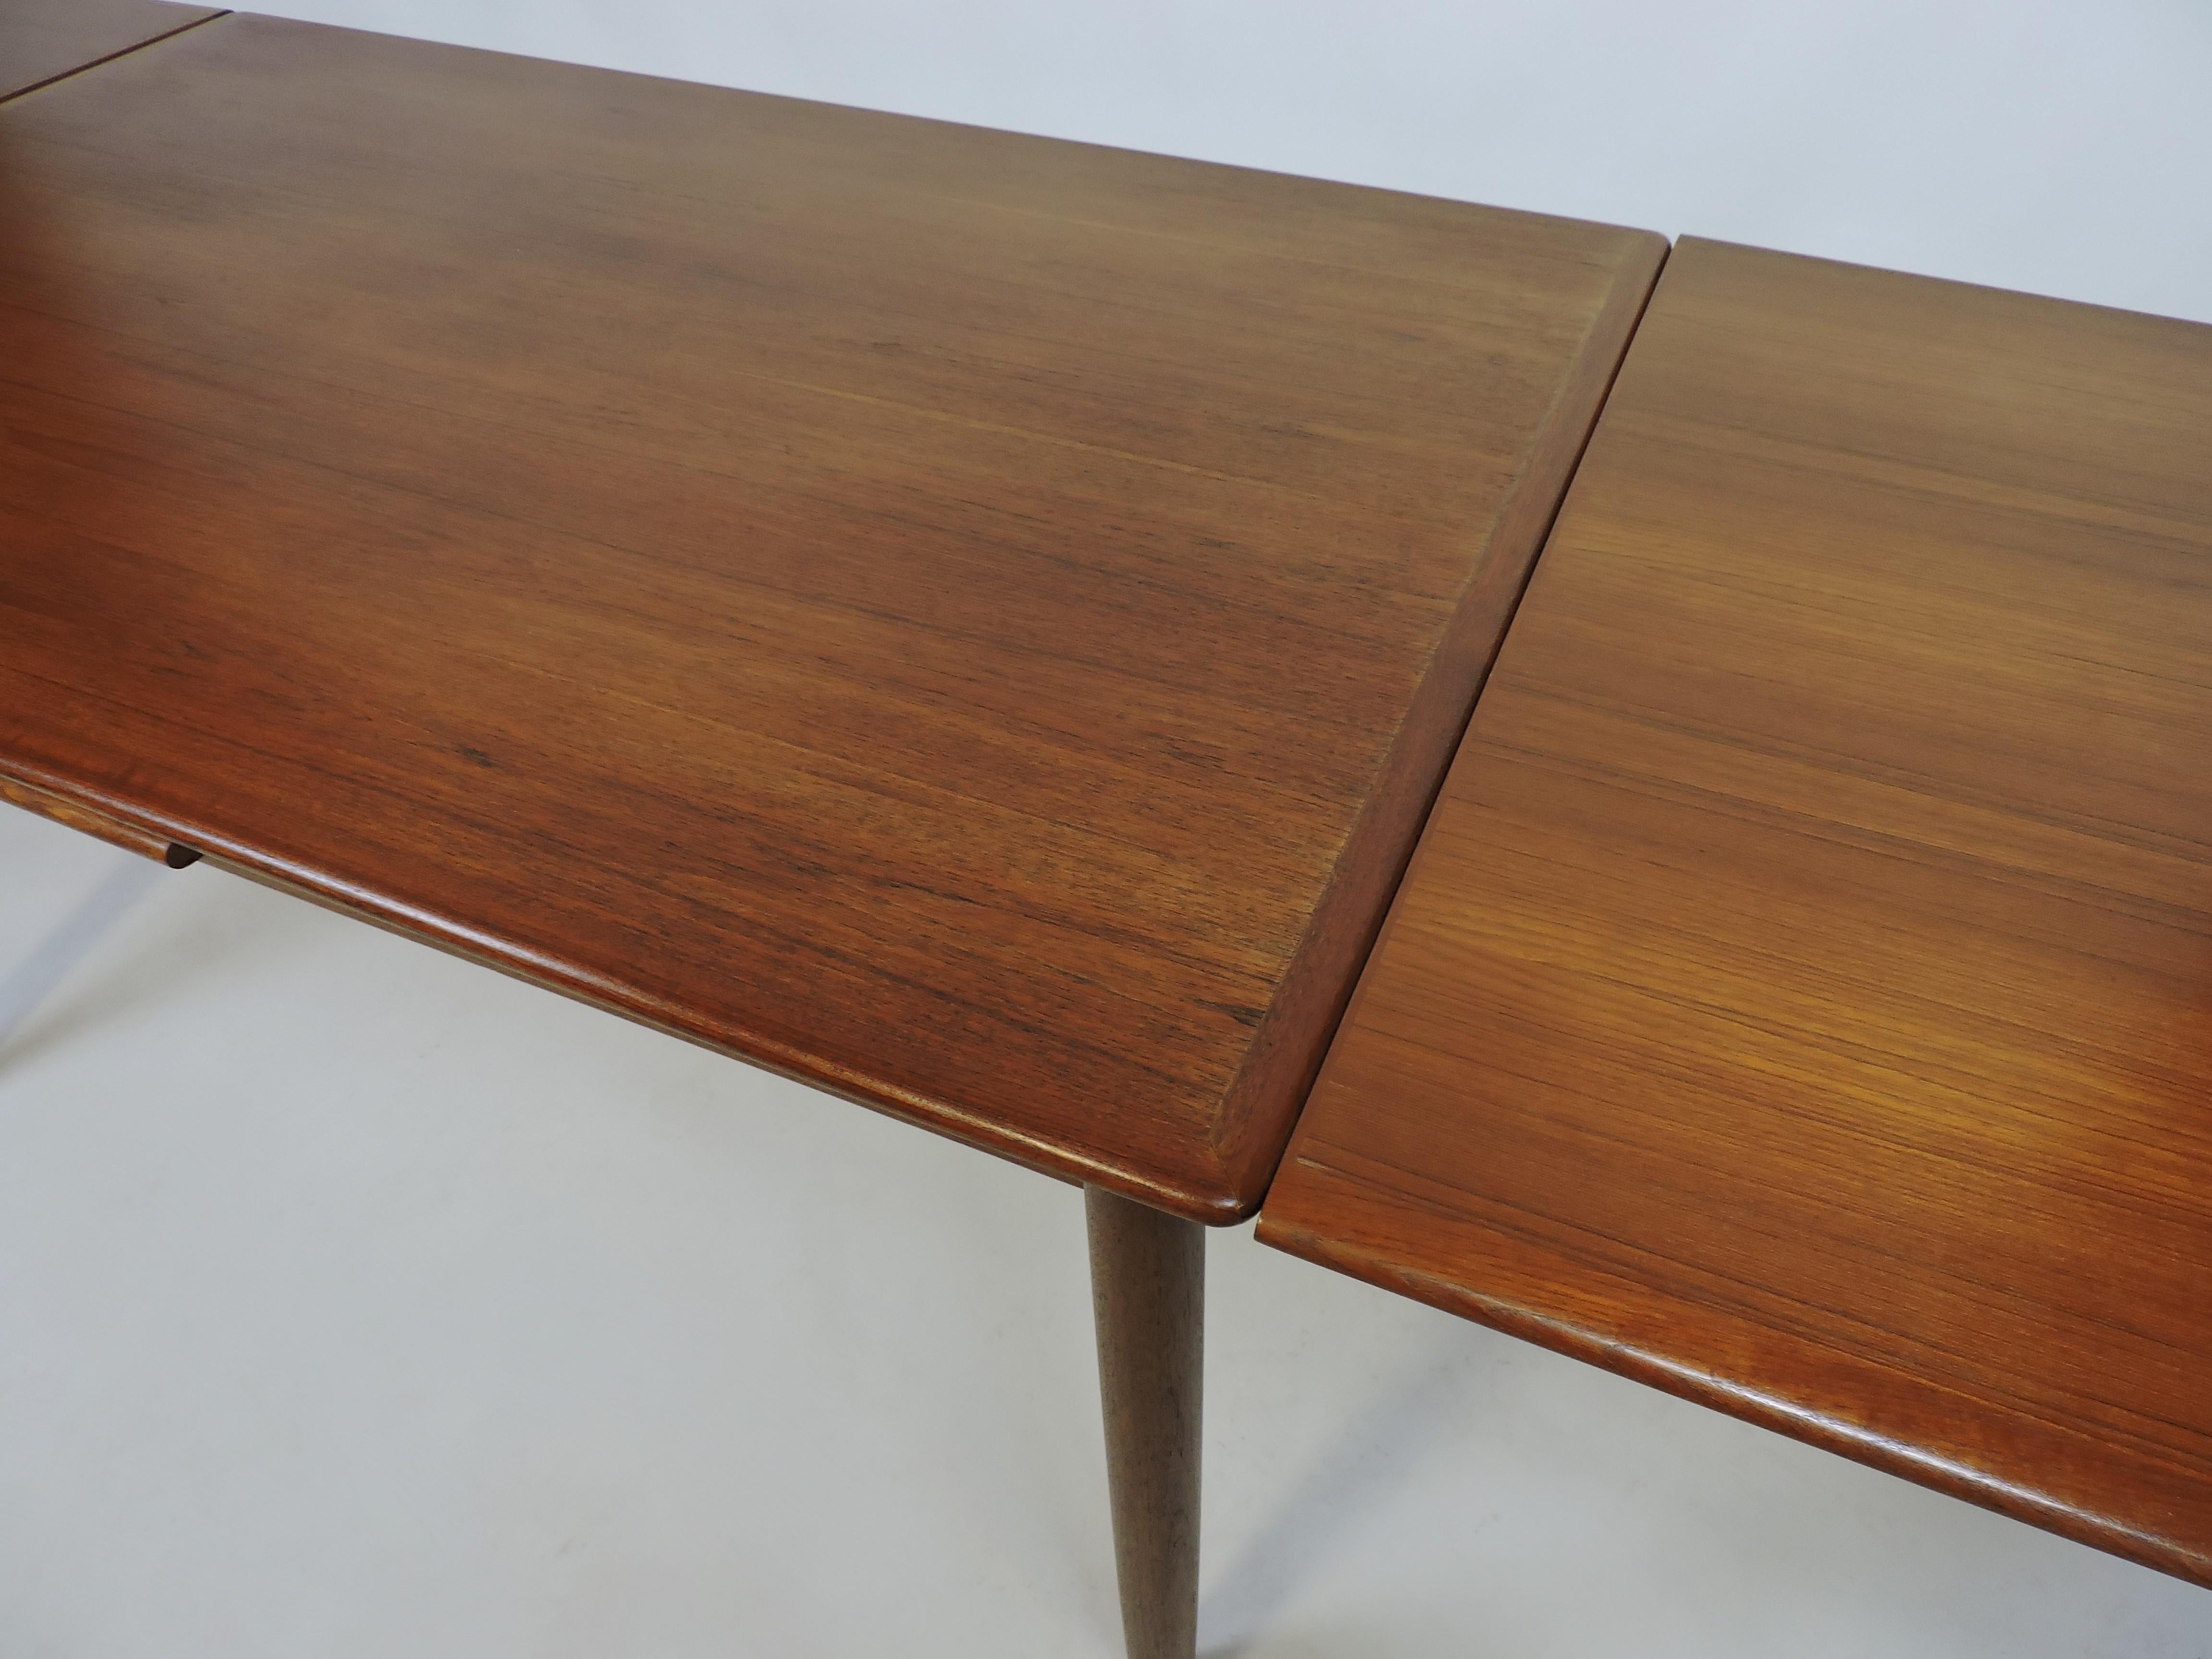 Large Danish Modern Teak Extendable Dining Table with Self-Storing Leaves 2